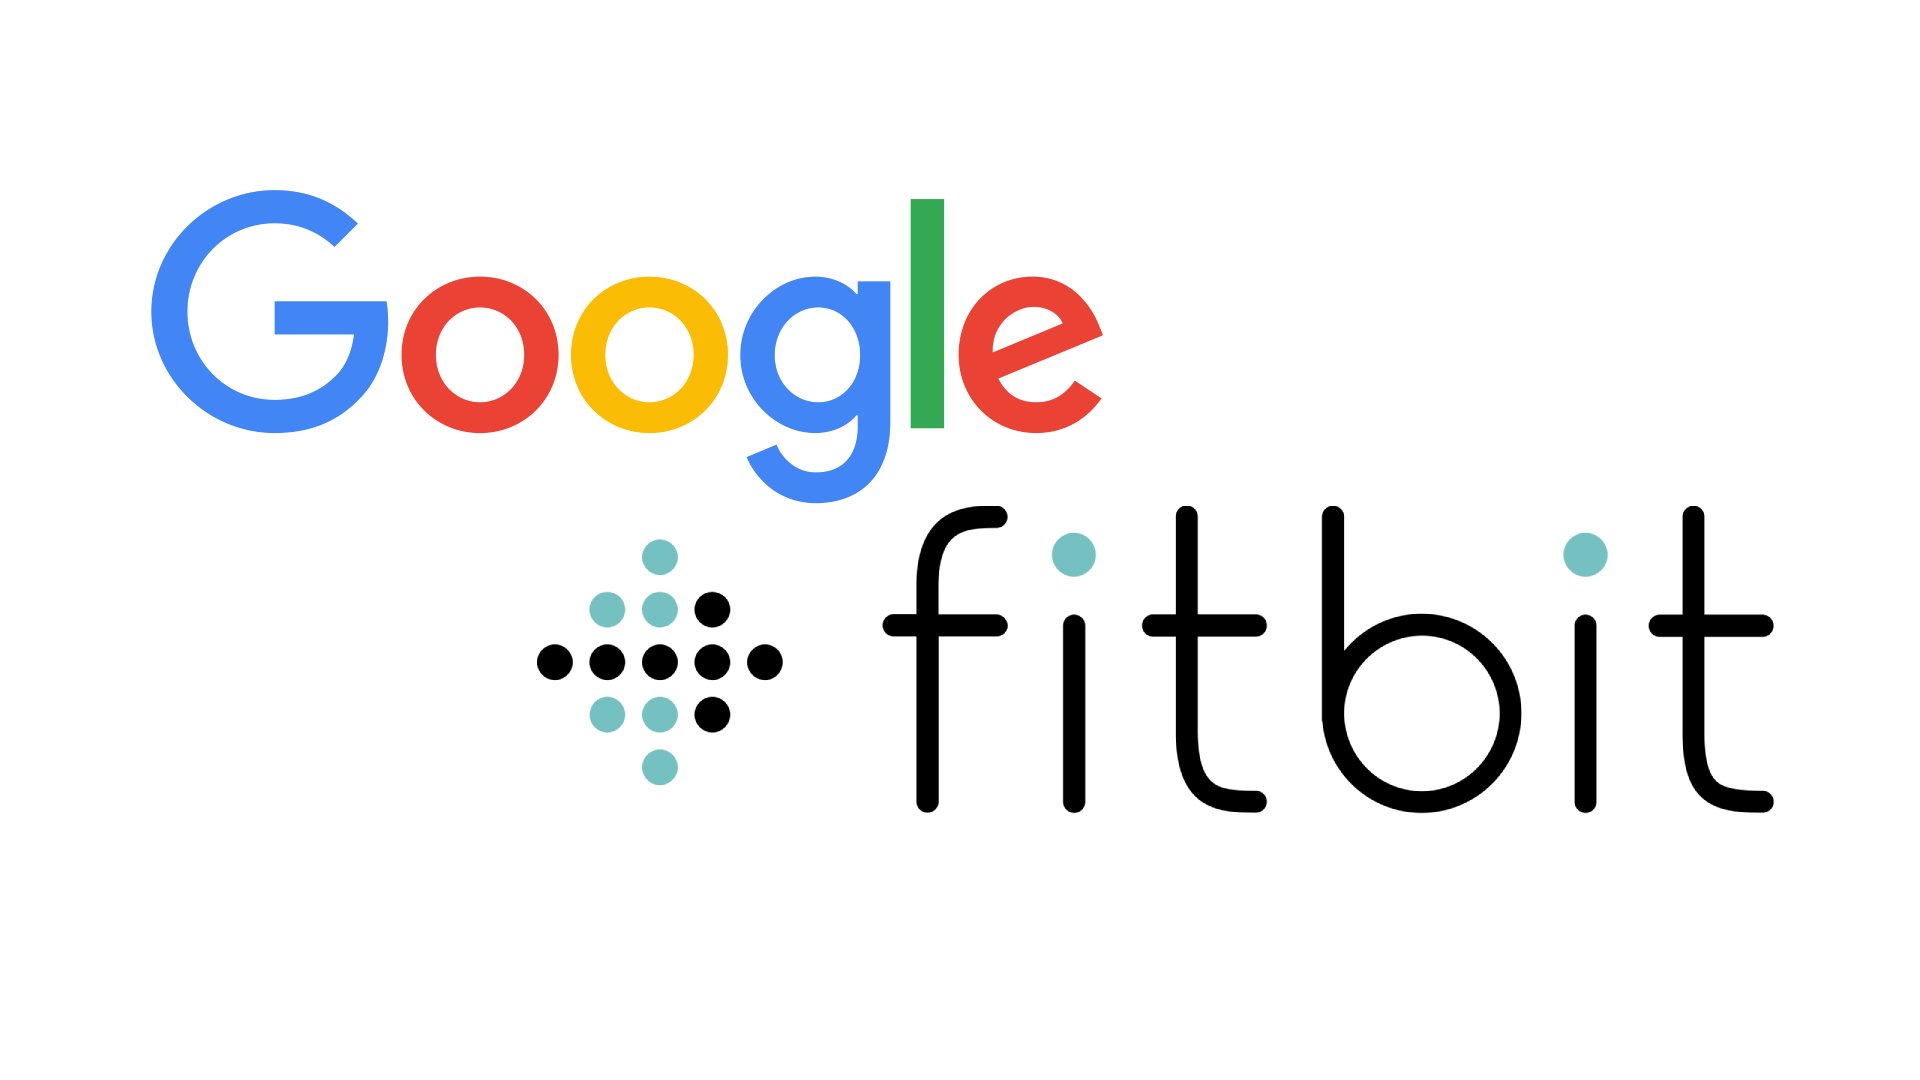 fitbit to be acquired by google